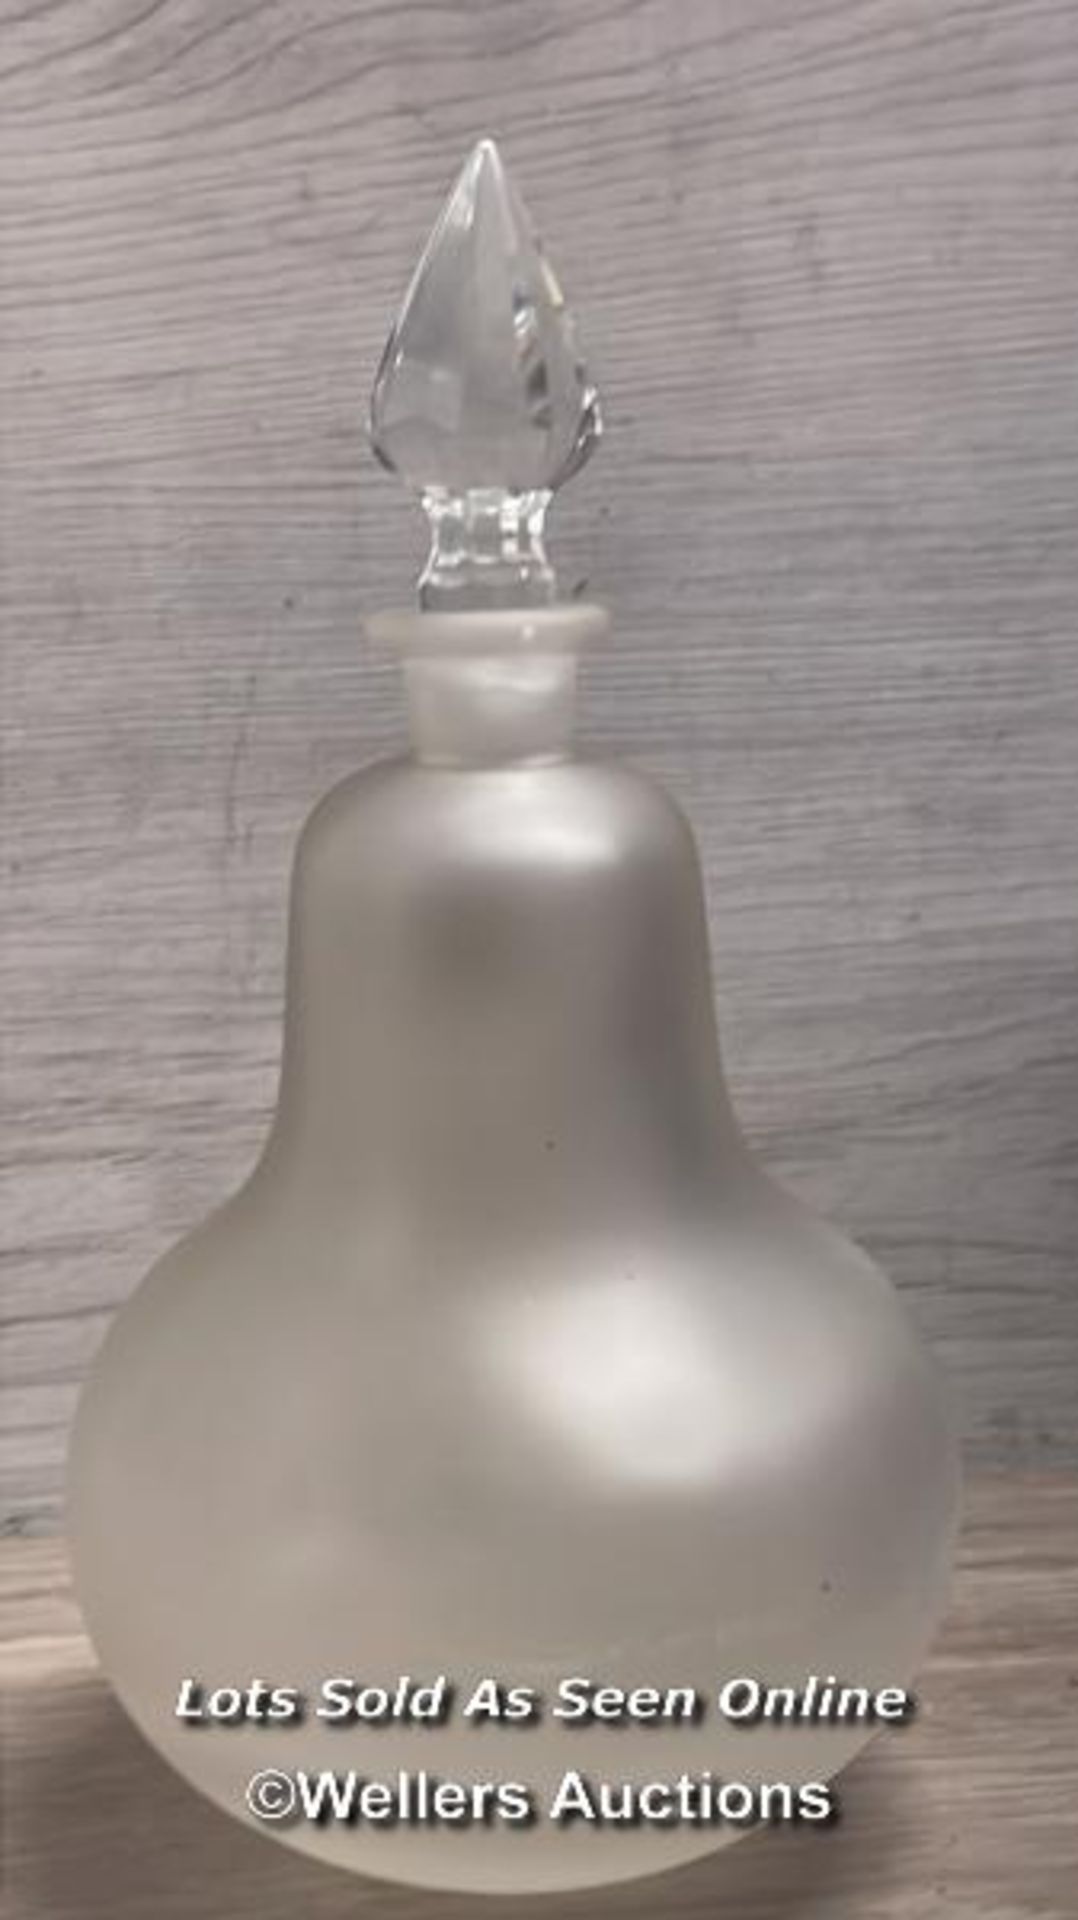 A RARE ROYAL PHARMACEUTICAL SOCIETY APOTHECARY BOTTLE, C1970S / 80'S, IN WHITE FROSTED GLASS WITH - Image 6 of 6